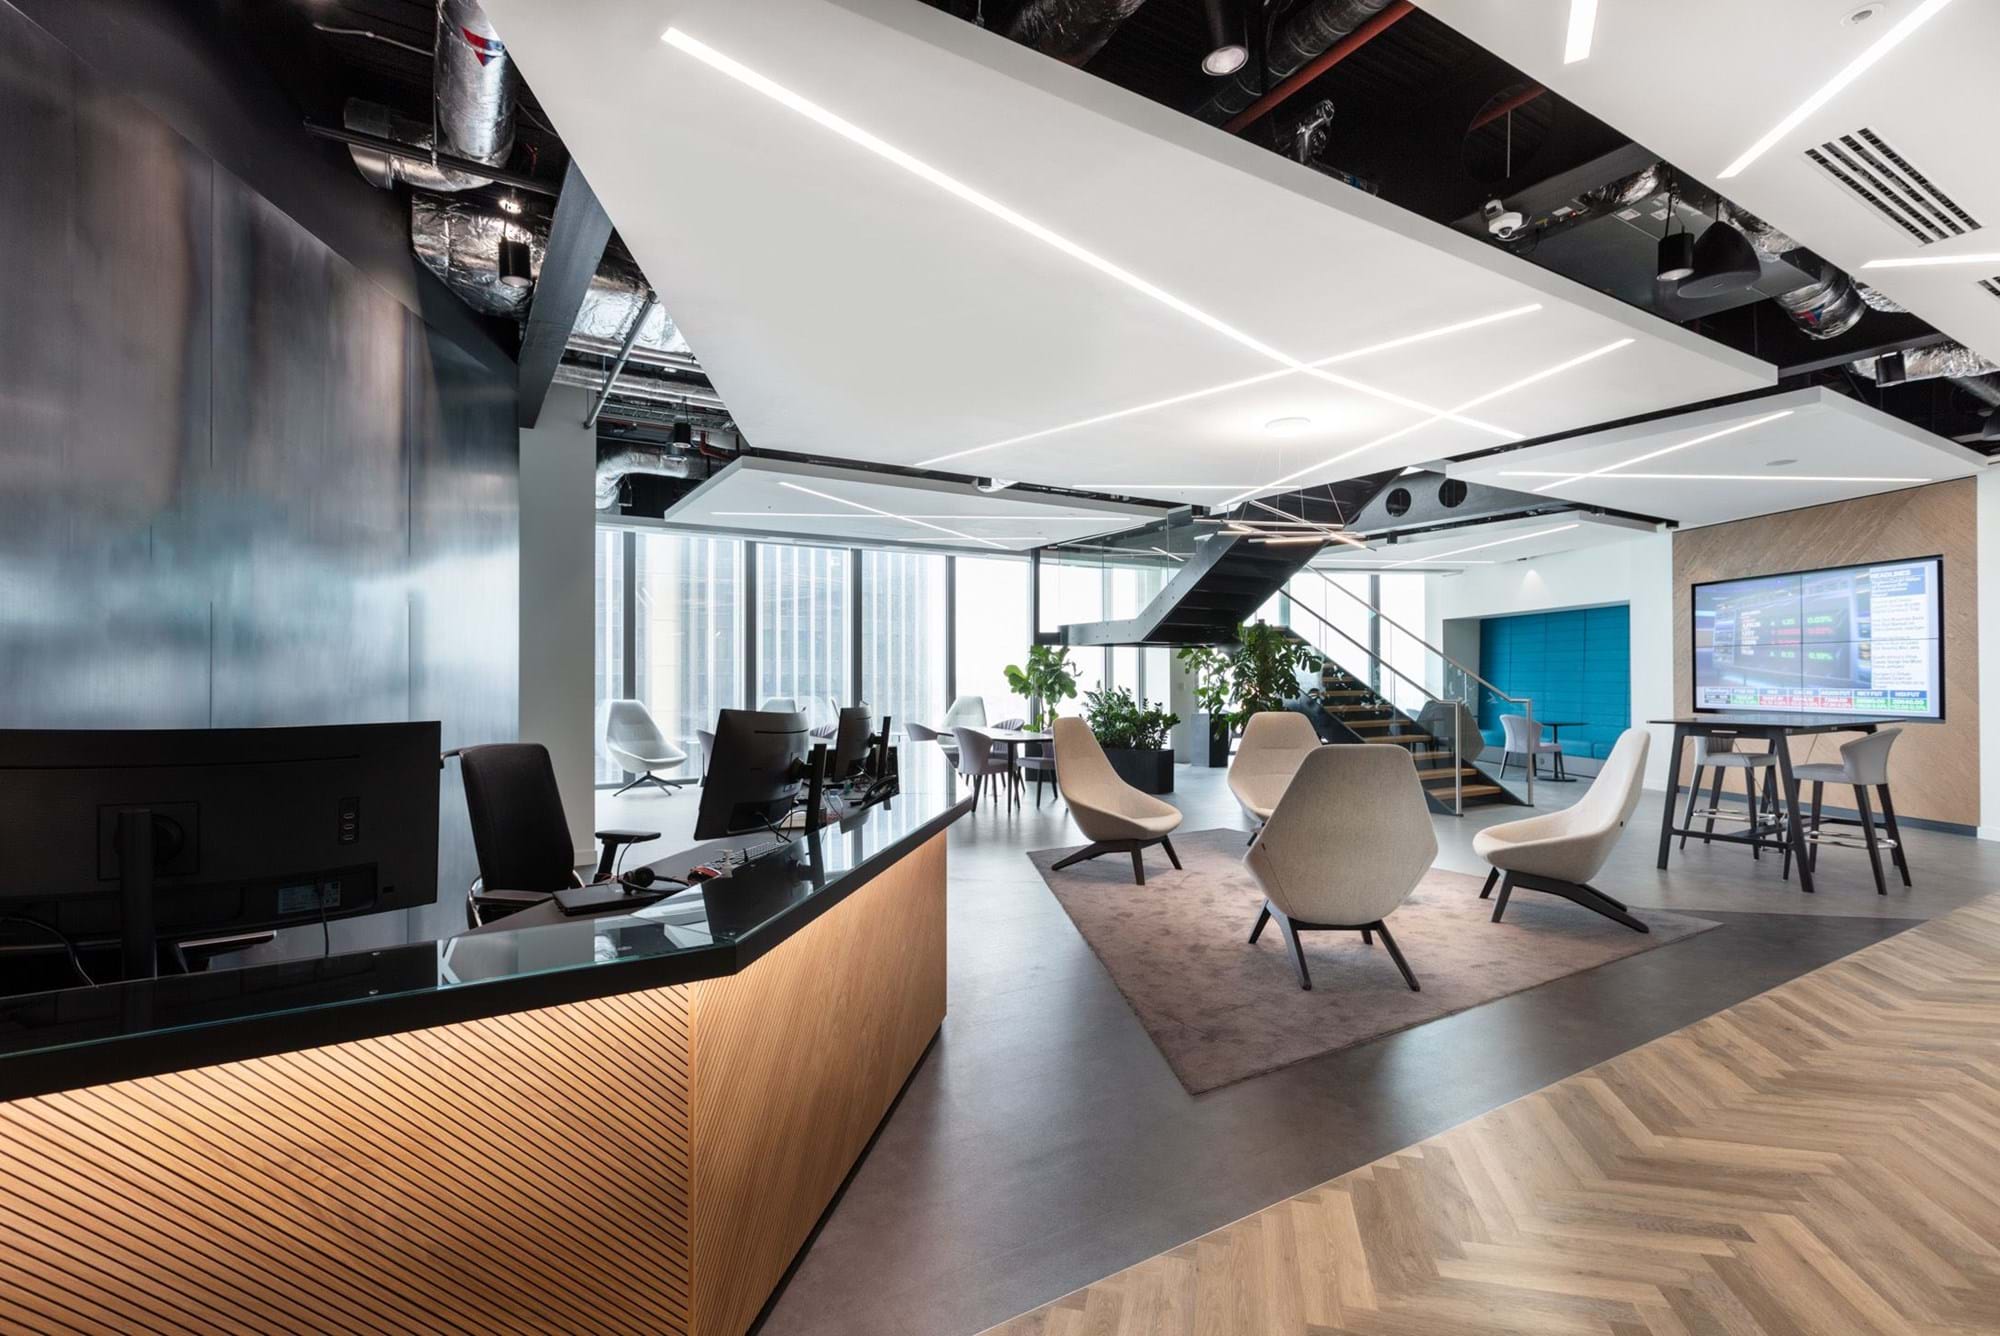 Modus Workspace office design, fit out and refurbishment - Insurance and Risk Management Firm - Modus_Verisk-21.jpg